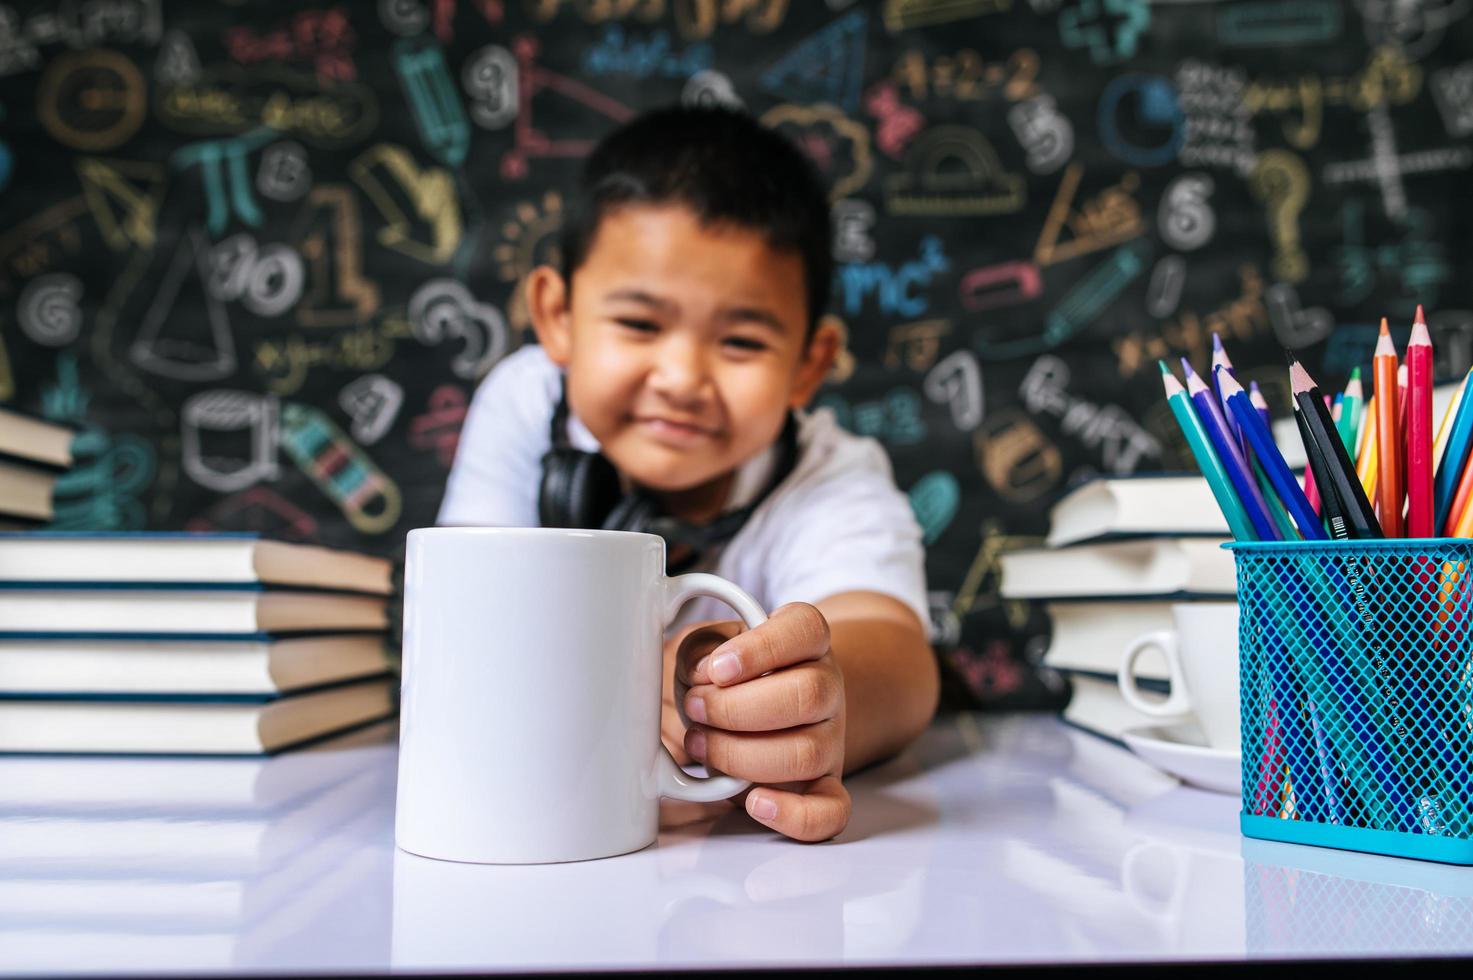 Child sitting and holding cup in the classroom photo